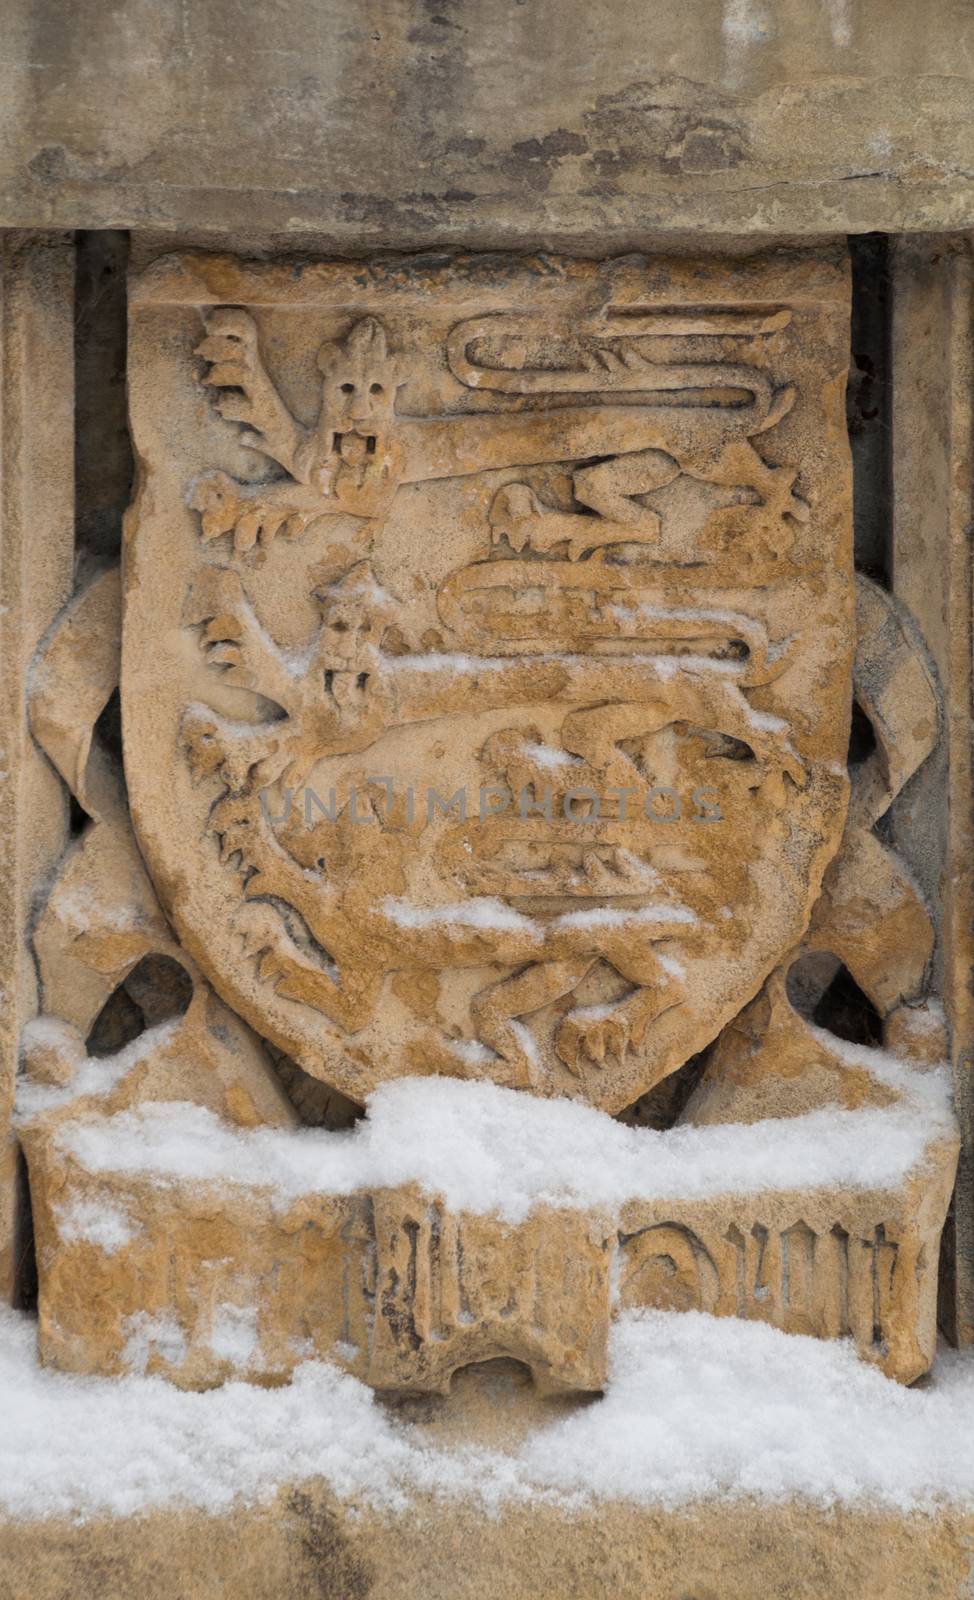 Coat of arms in the folly at the MacKenzie King estate, Gatineau Park. Snowing